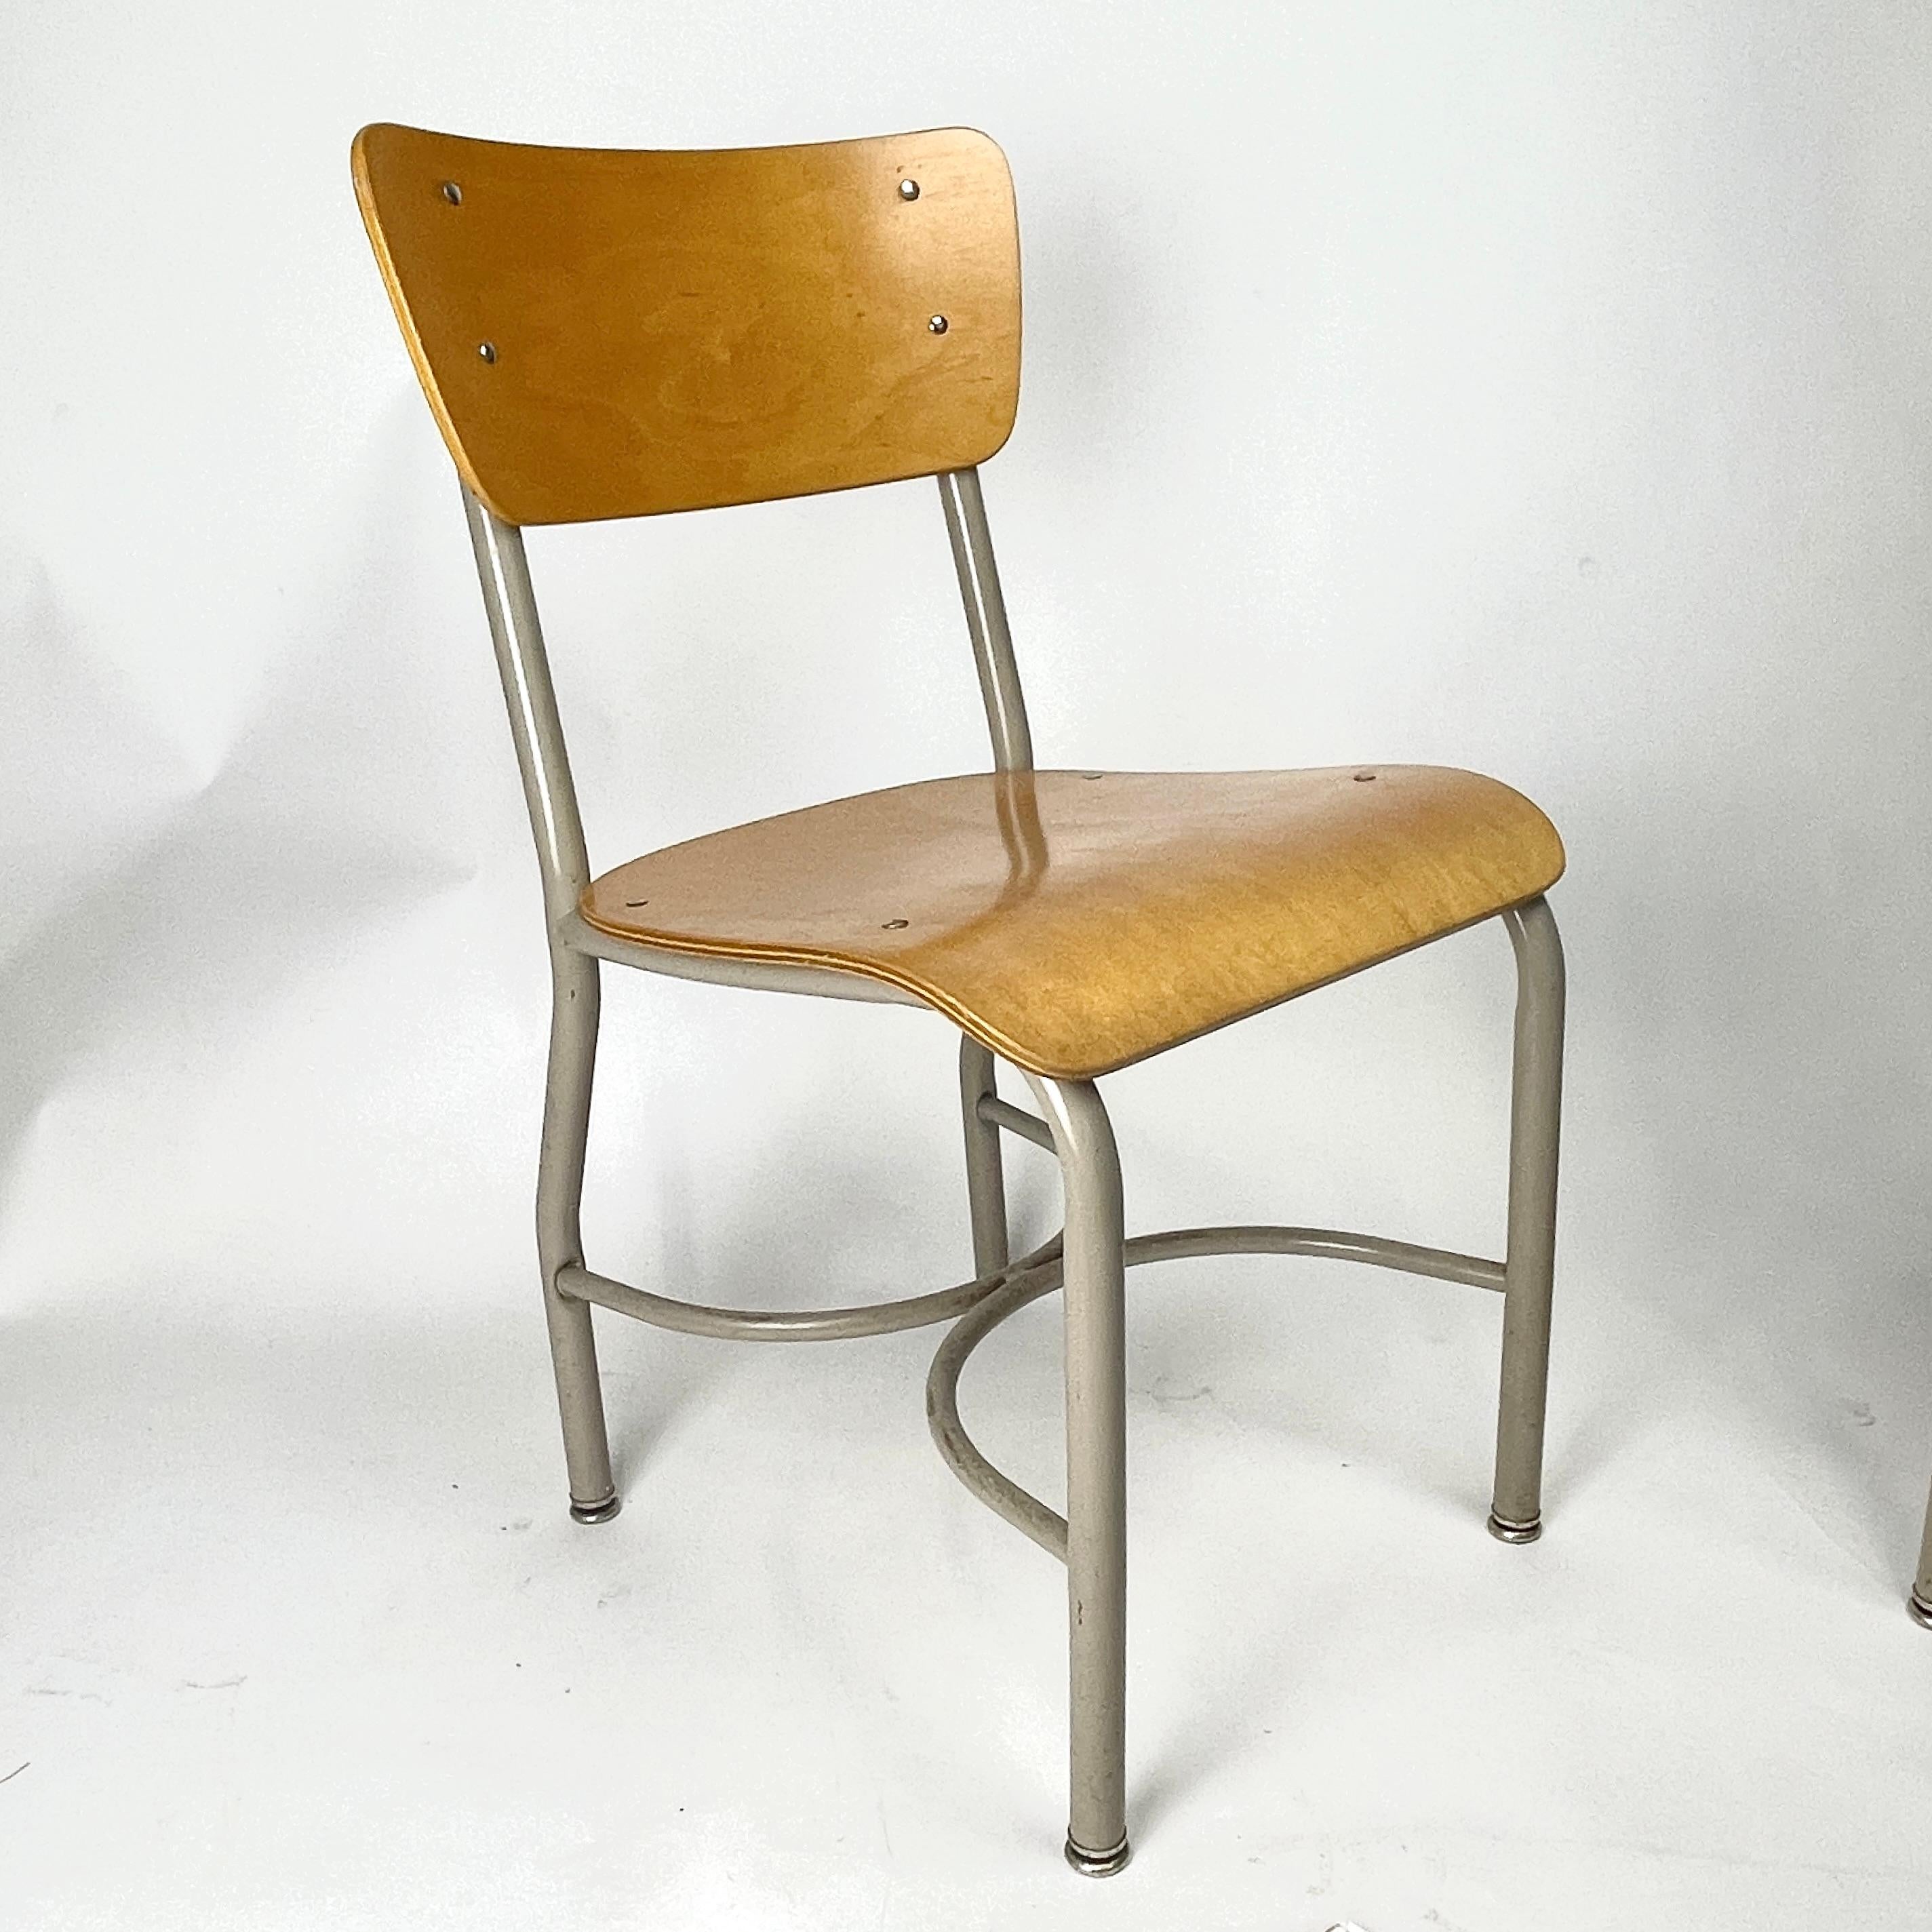 American Midcentury French Style Grey & Birch Plywood School or Cafe Chairs -35 Available For Sale